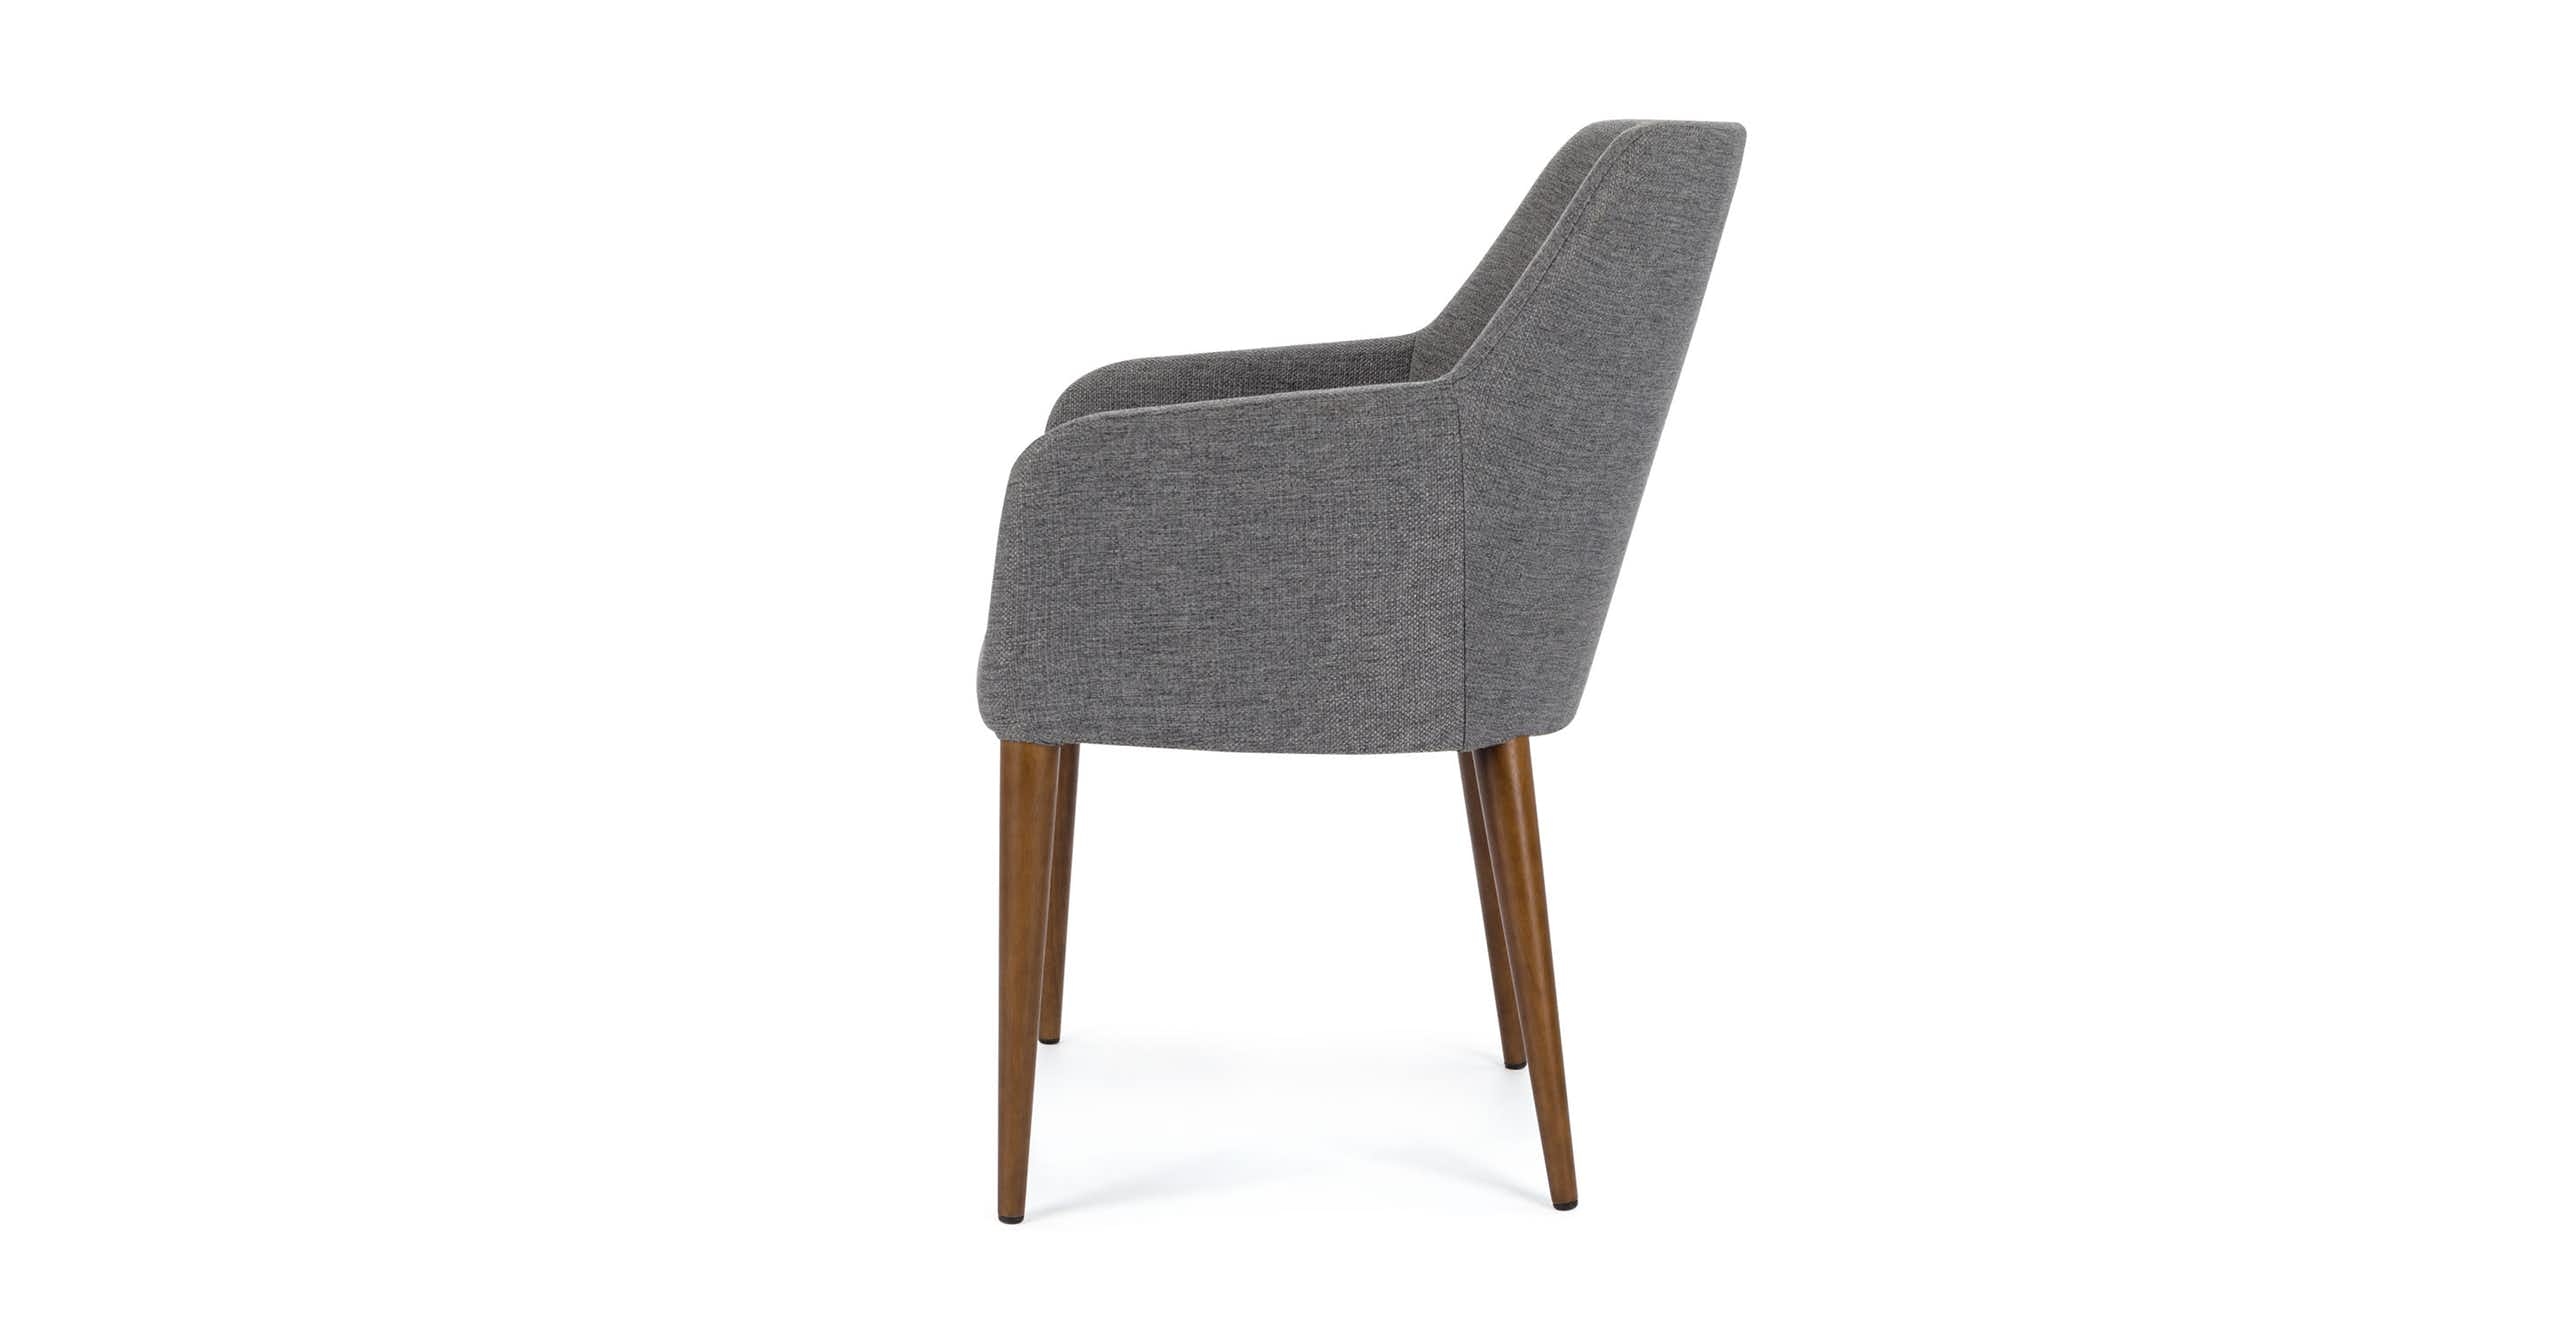 Feast Gravel Gray Dining Chair, pair - Image 1